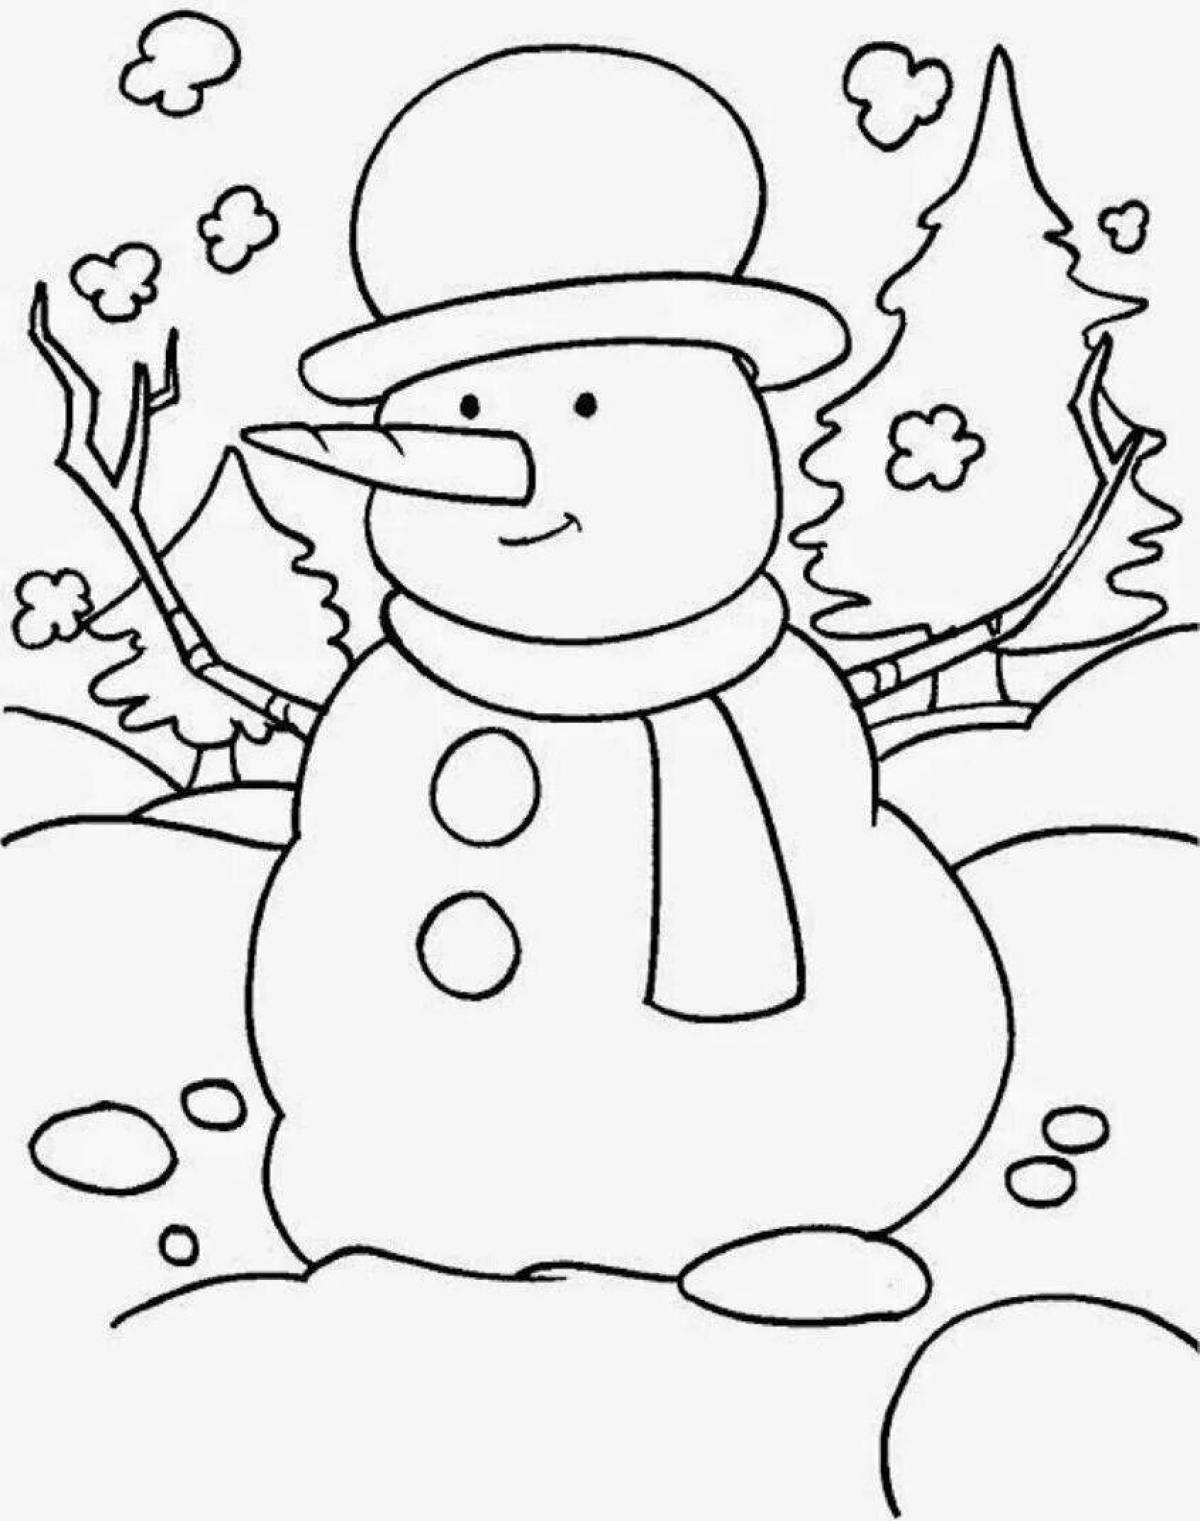 Radiant snowman coloring book for children 6-7 years old